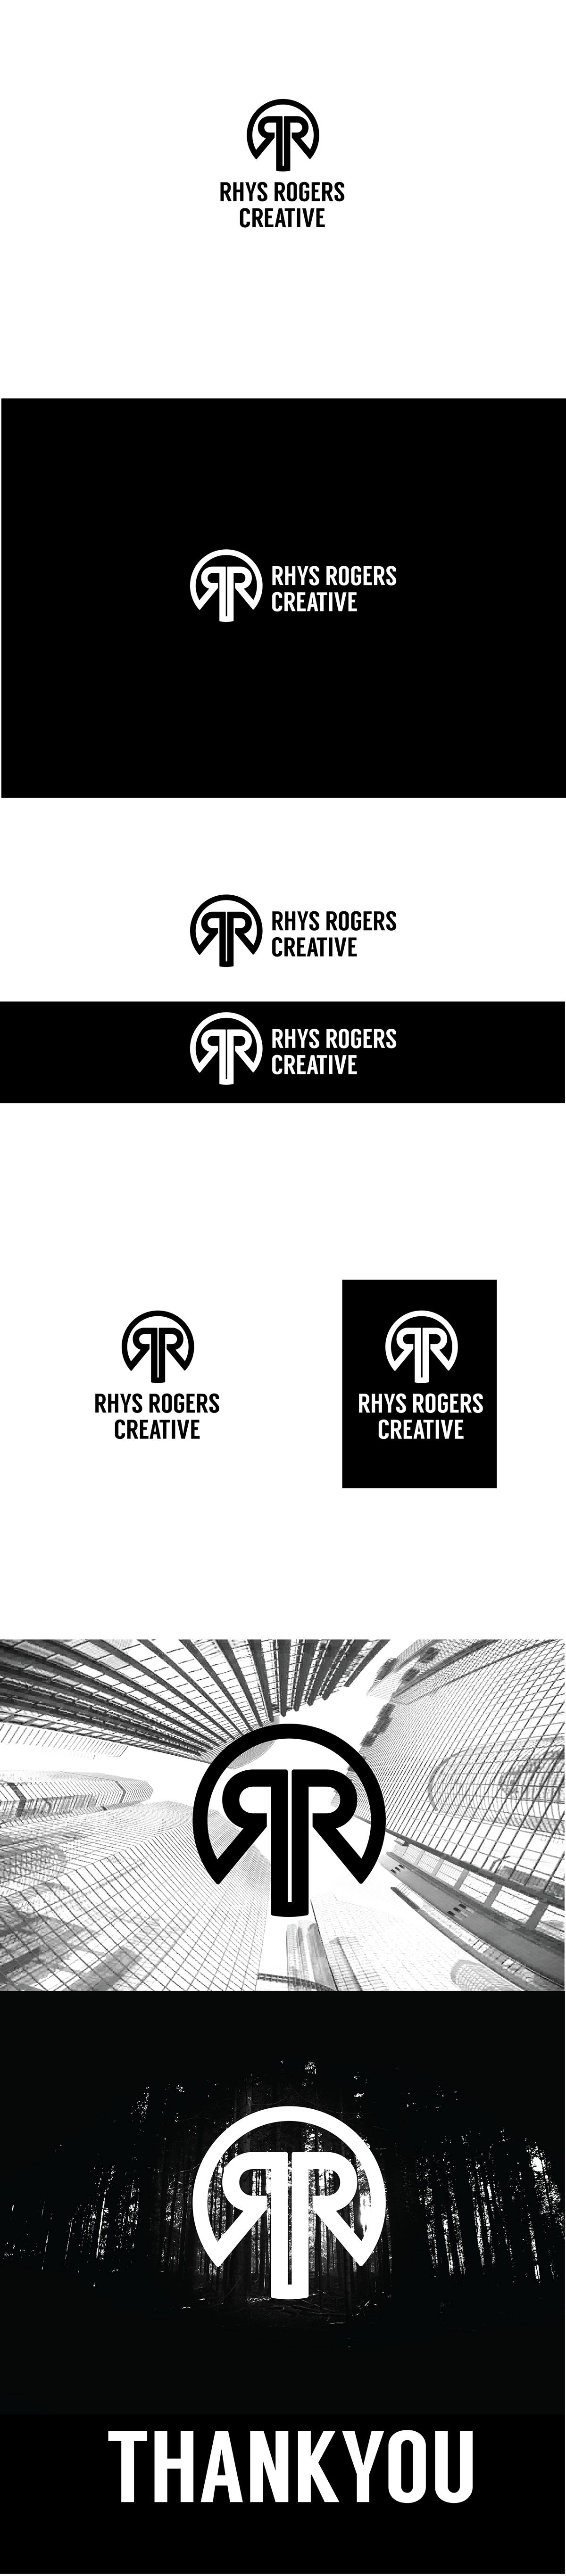 personalbrand RhysRogers creative soloution